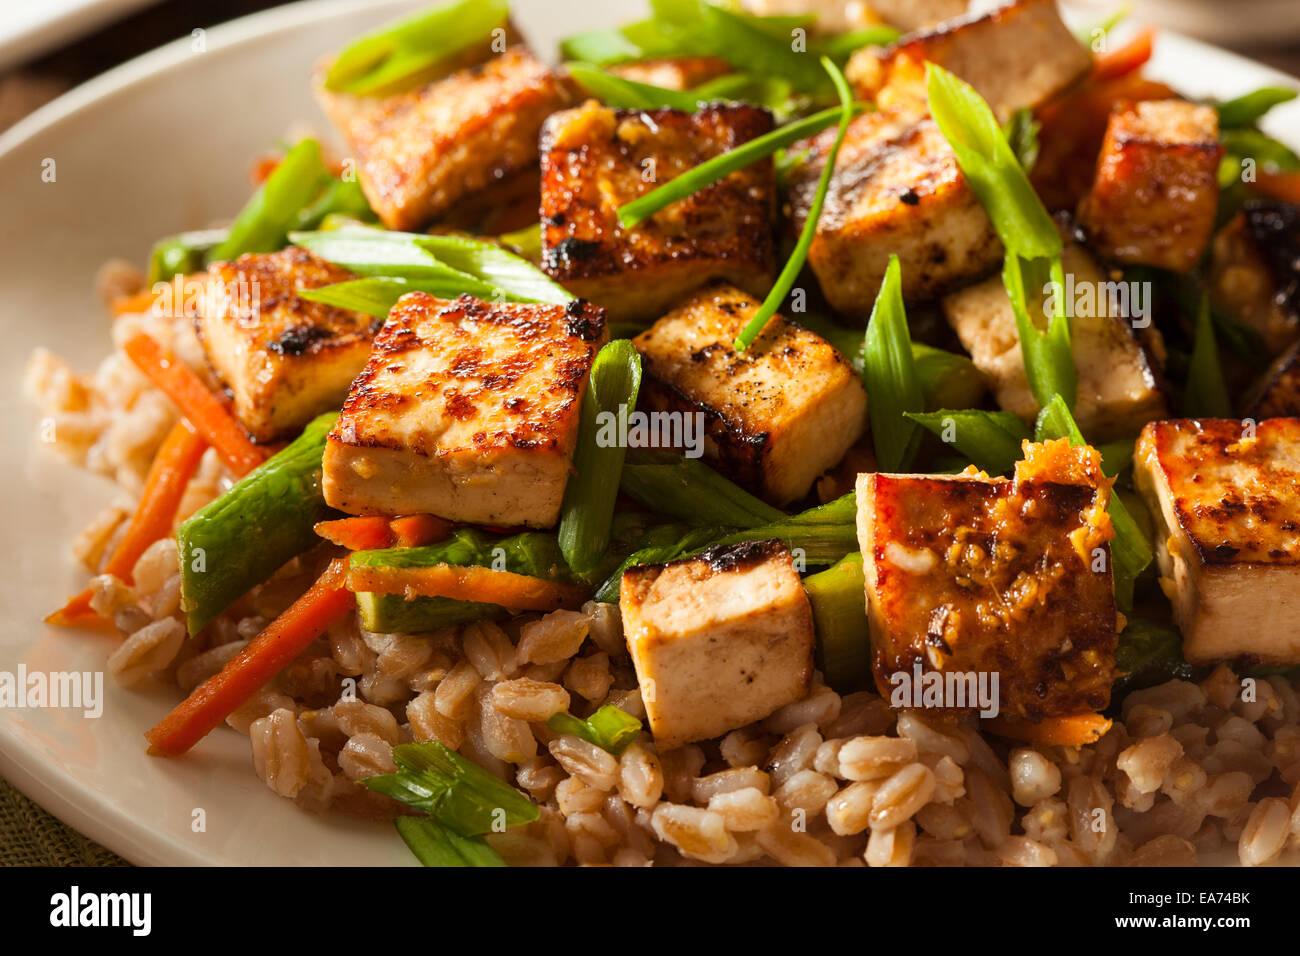 Homemade Tofu Stir Fry with Vegetables and Rice Stock Photo